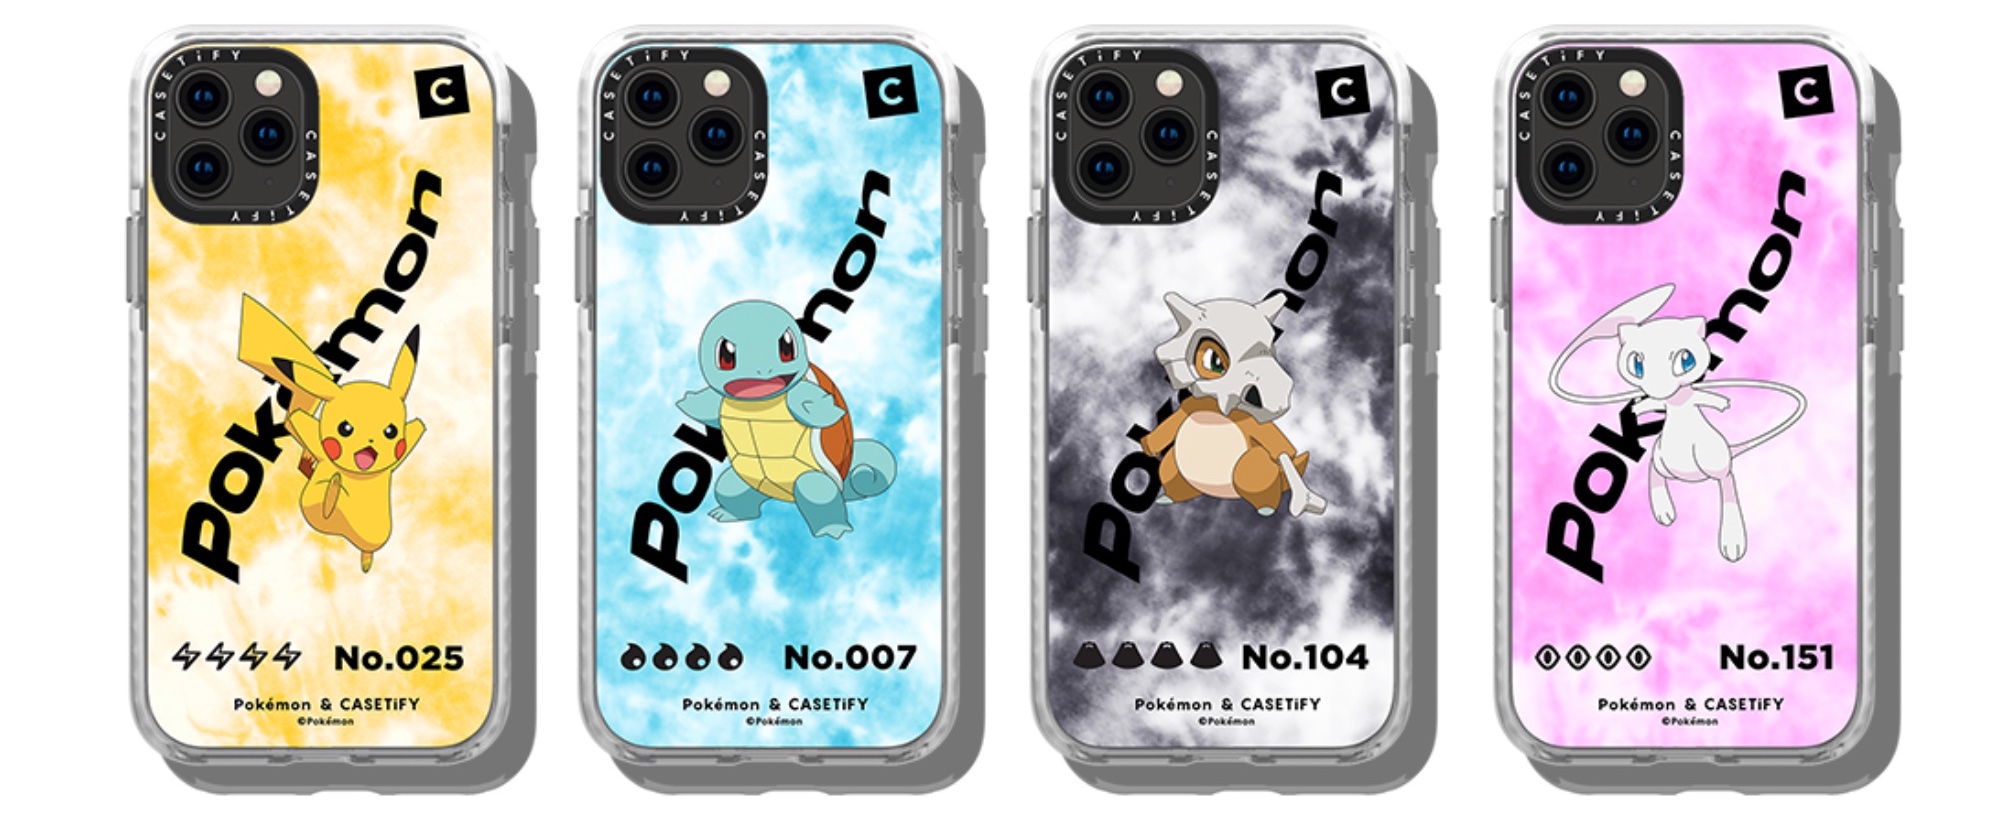 Pokémon iPhone cases from CASETiFY launch next month